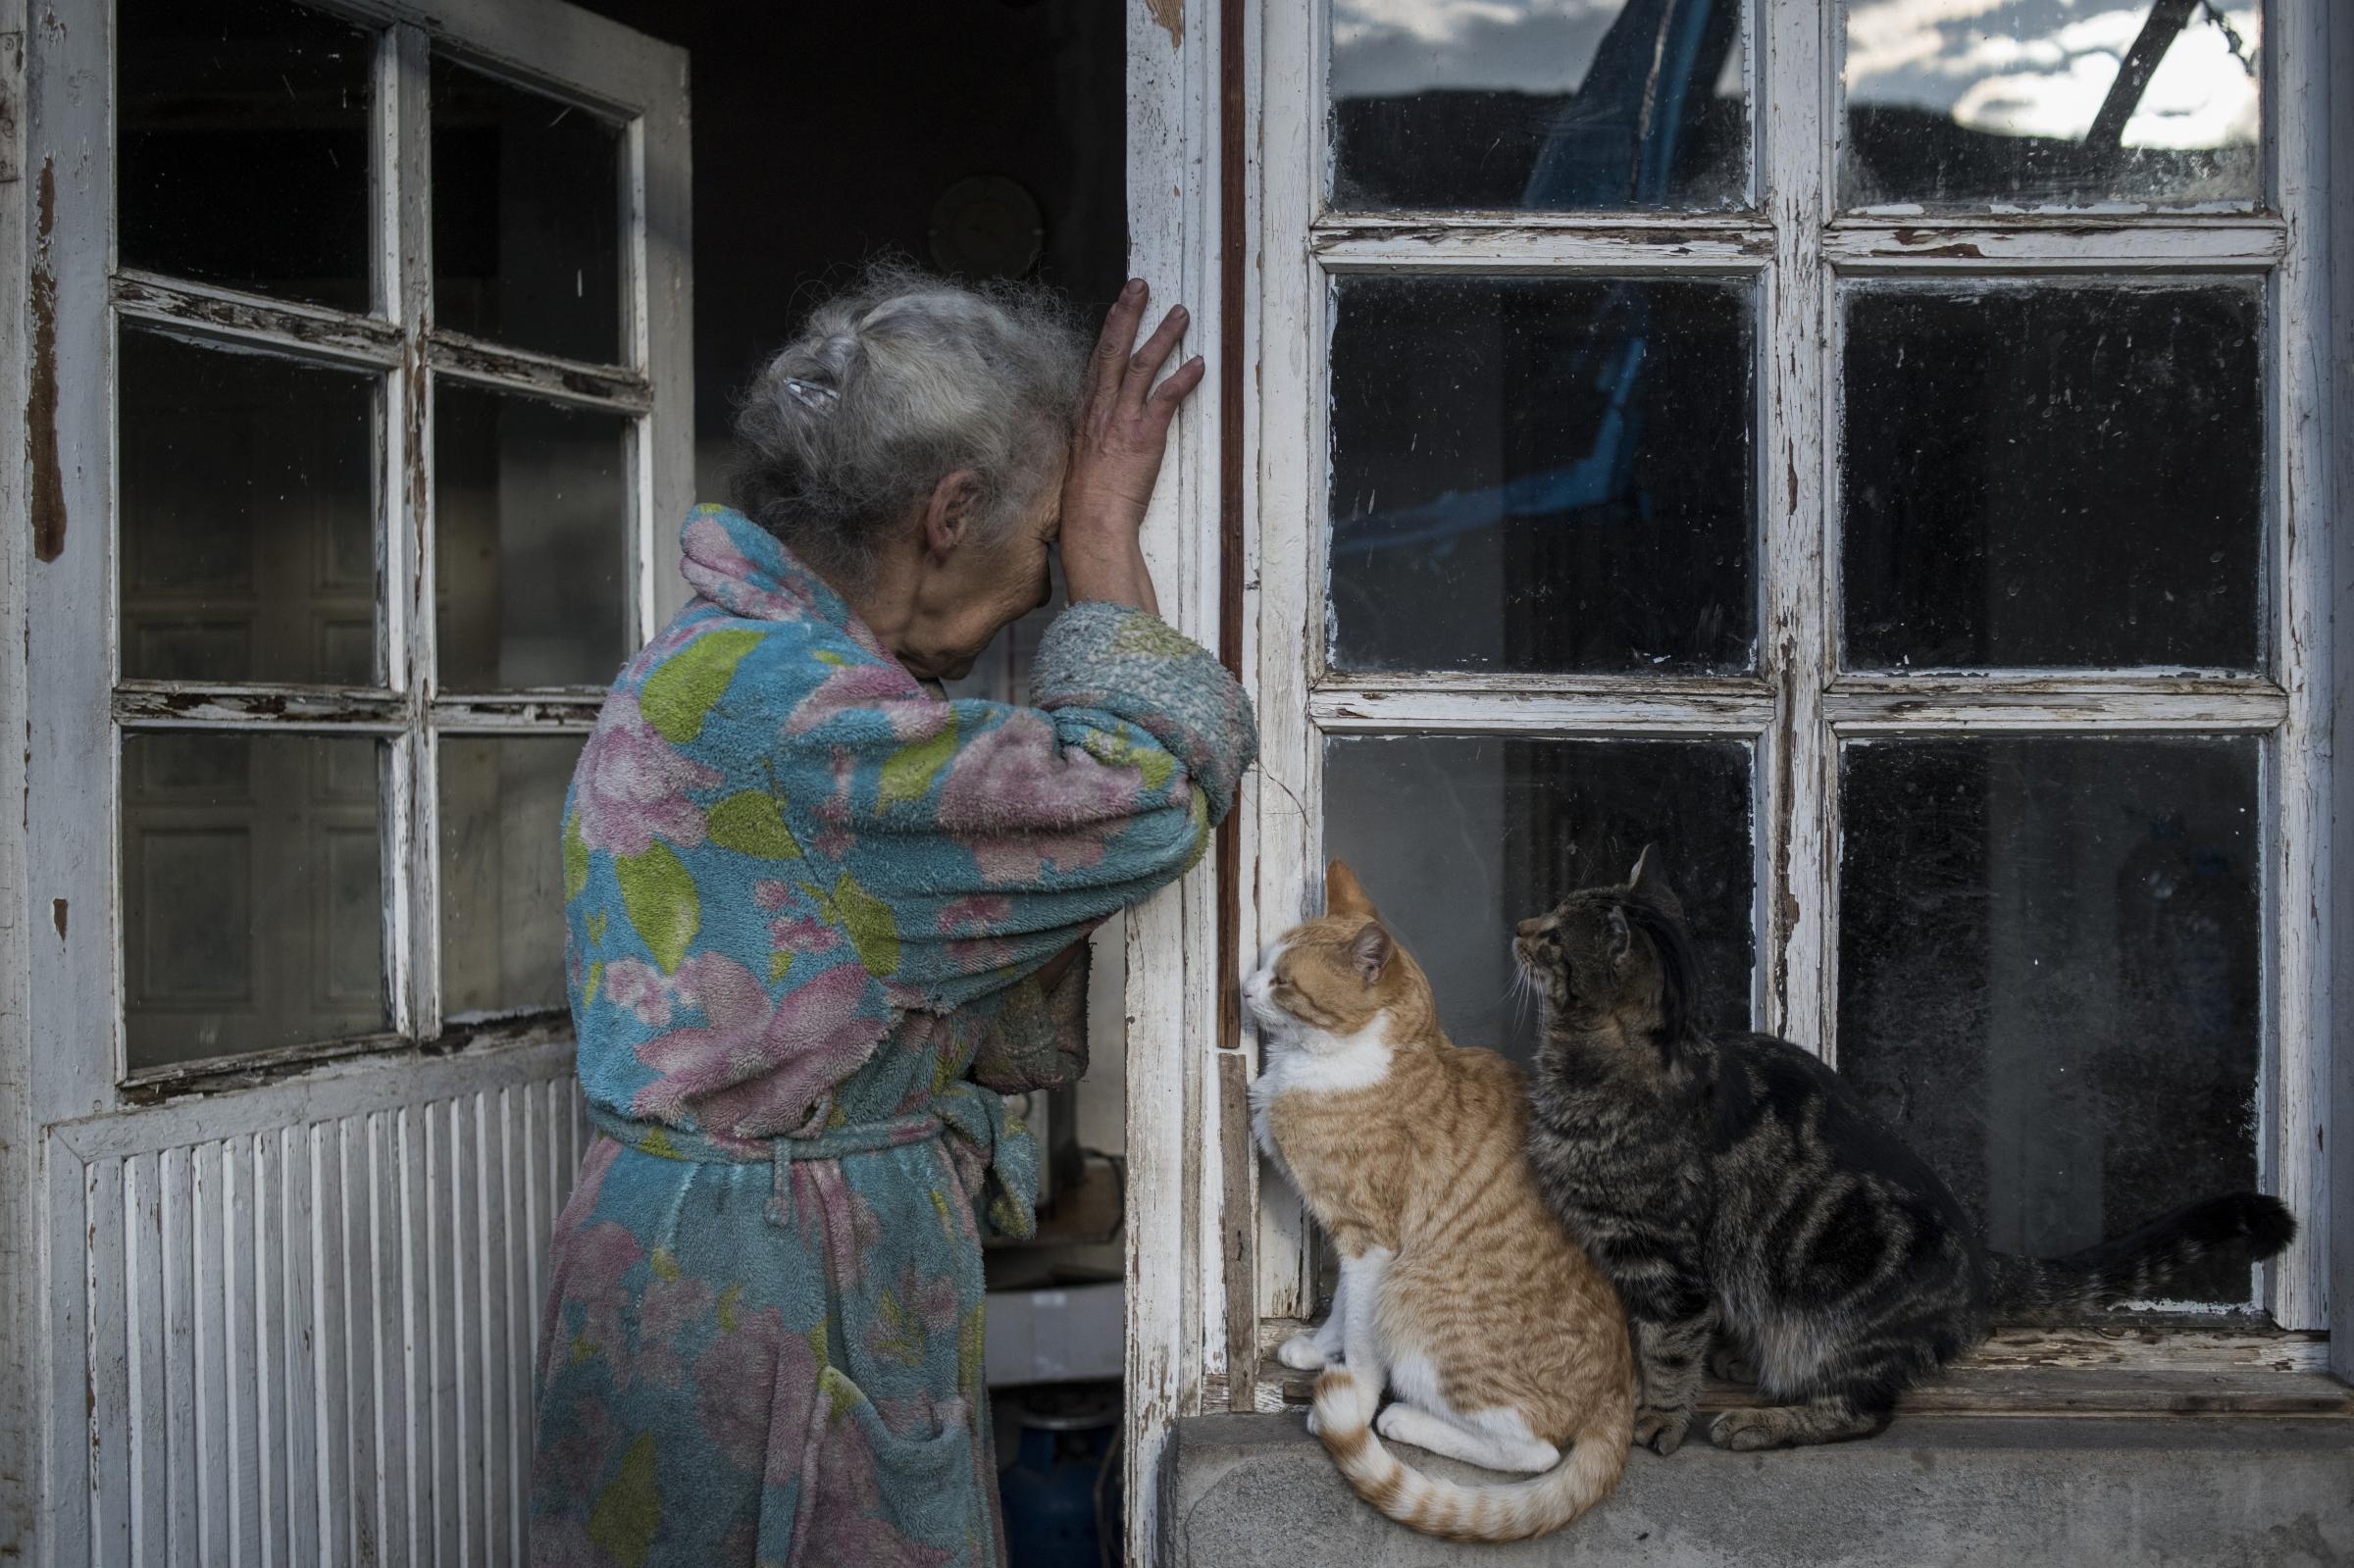 Paradise Lost - Abovyan Hasmik  (69) cries at the door of her house in the village of Nerkin Sus, Nagorno-Karabakh

